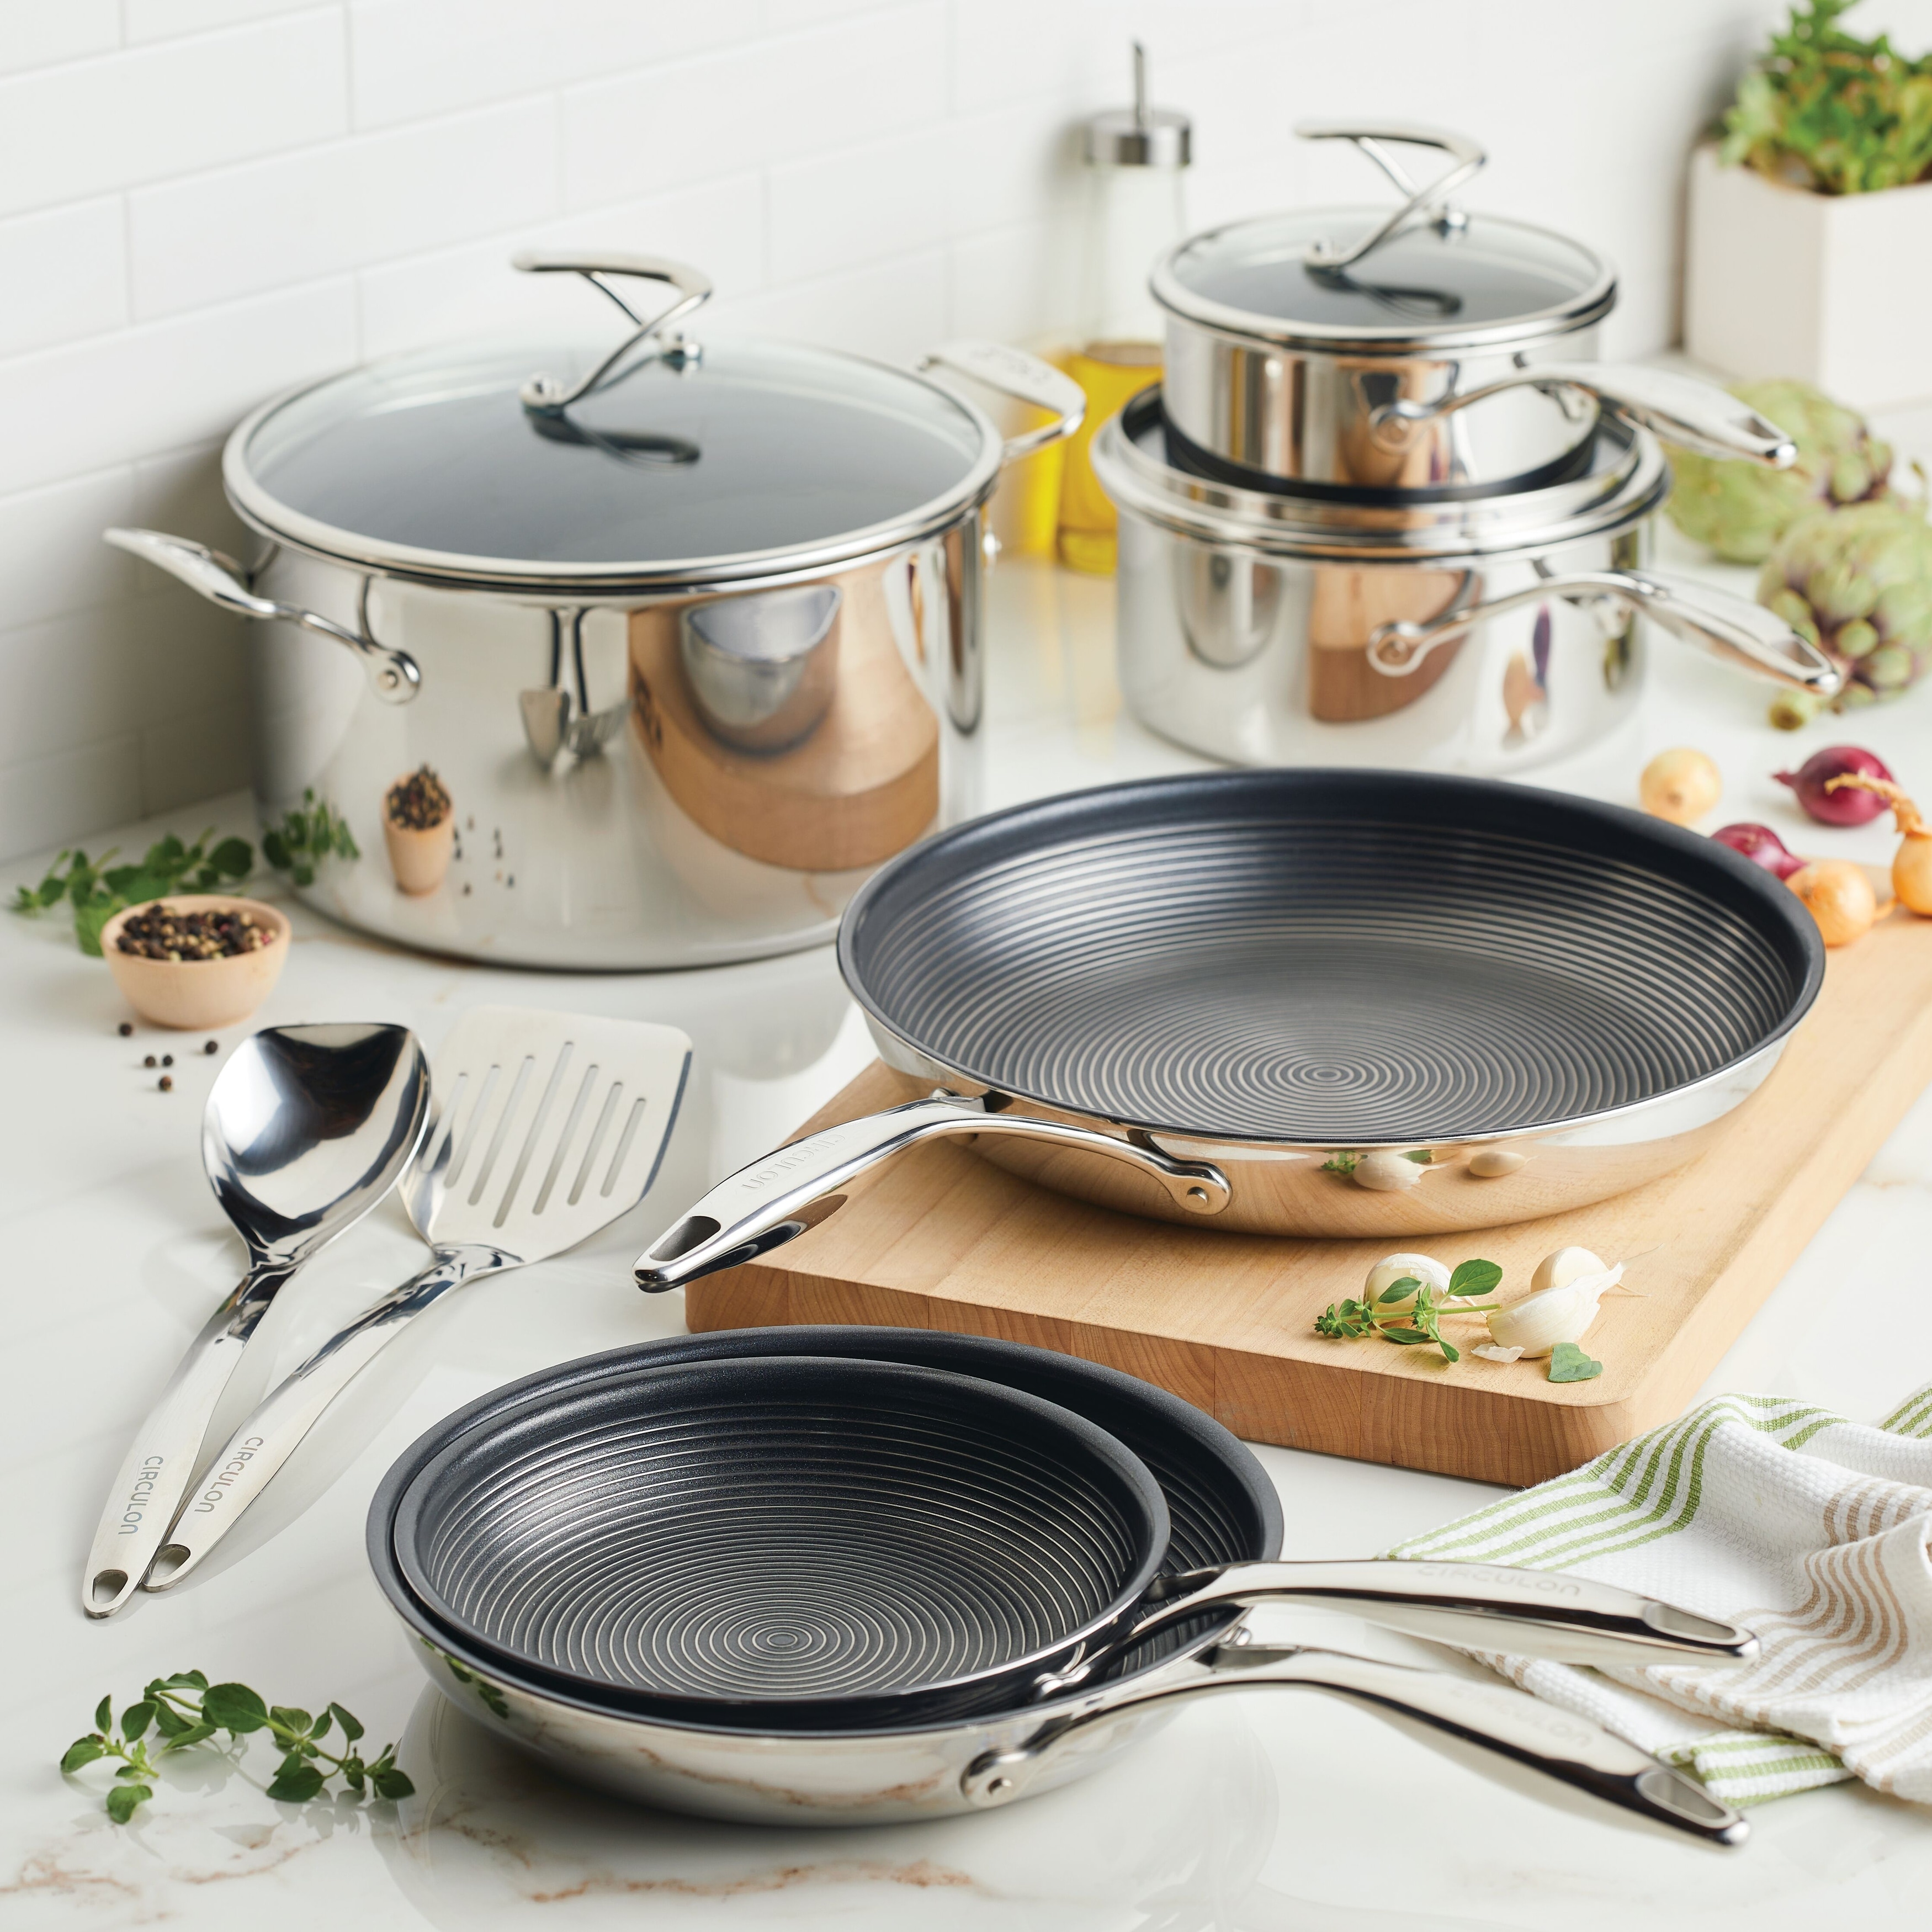 https://ak1.ostkcdn.com/images/products/is/images/direct/5935fe927235c8cd9f6be955c5ba30694e368d75/Circulon-Clad-Stainless-Steel-Induction-Cookware-and-Utensil-Set-with-Hybrid-SteelShield-Nonstick-Technology%2C-11-Piece%2C-Silver.jpg